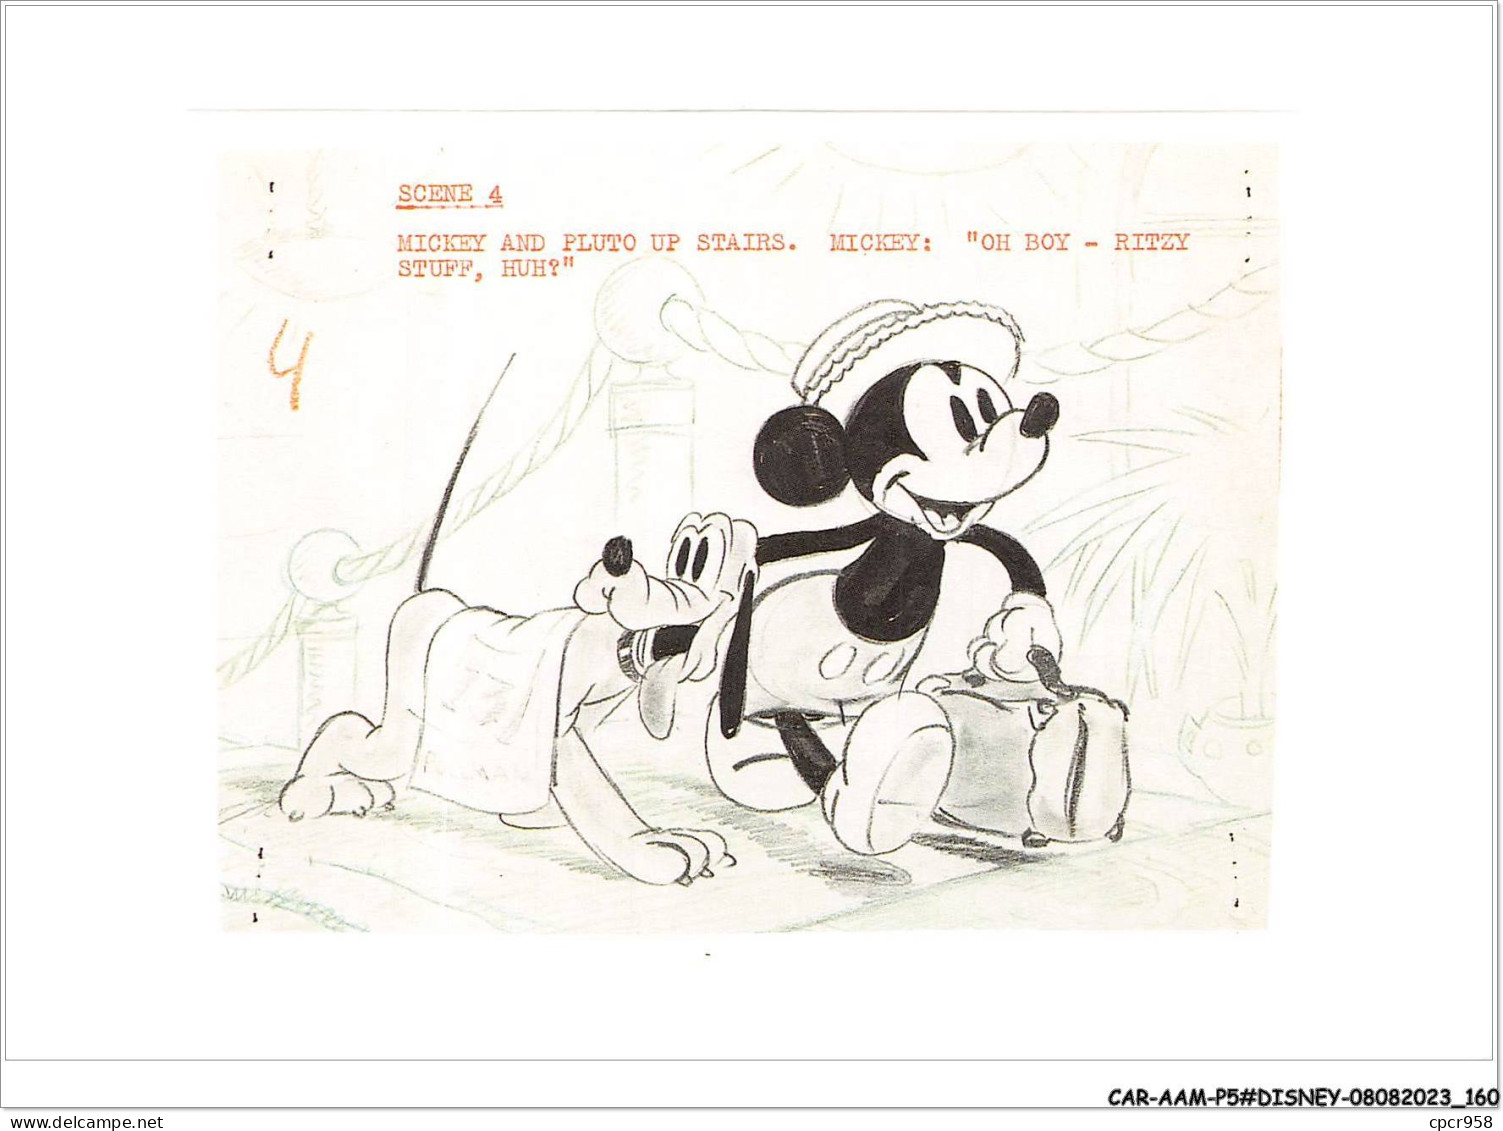 CAR-AAMP5-DISNEY-0488 - Mickey - Original Story Sketch Of Mickey Mouse And Pluto - Society Dog Show - Disneyland